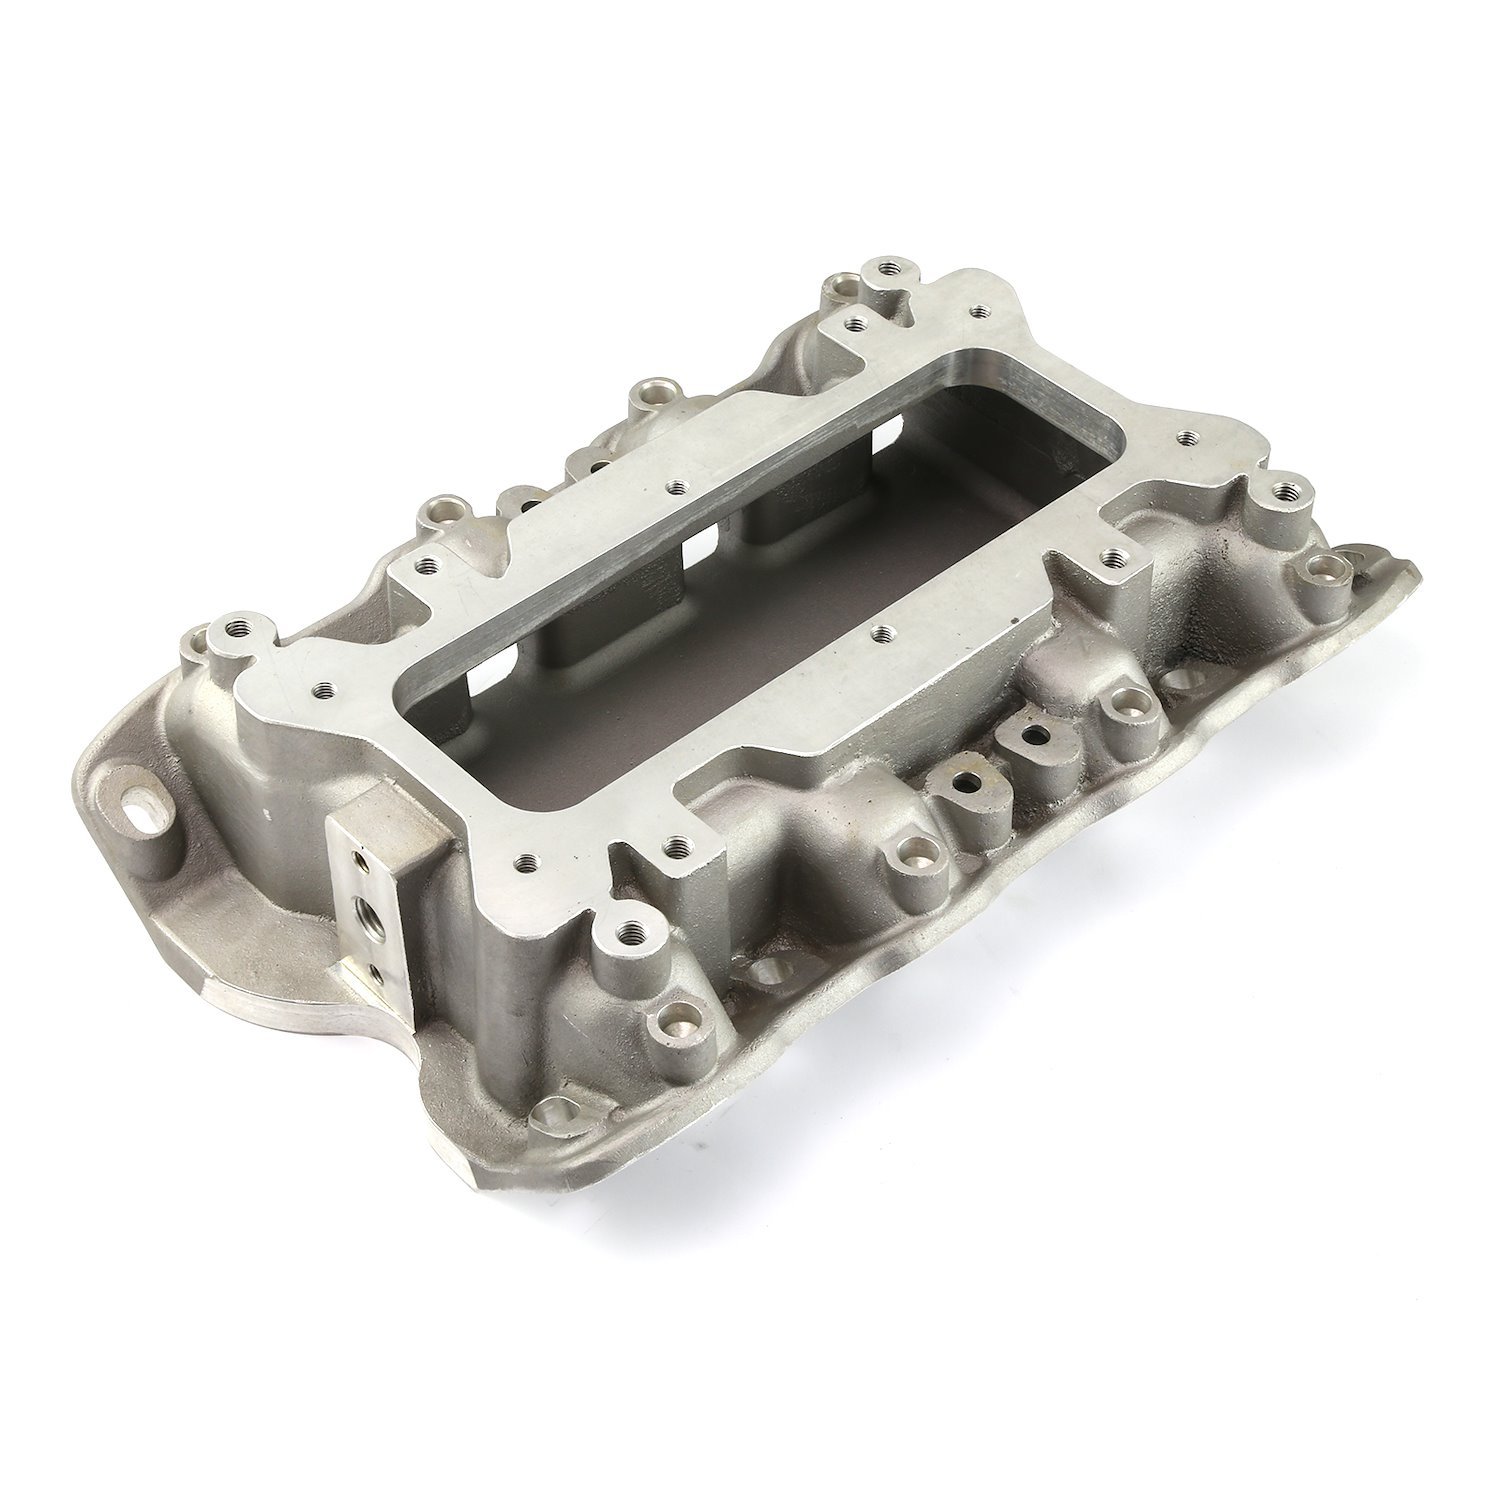 Podium-Series Open Intake Manifold Ford 302/351C 9.2 Deck with 3V Cleveland Heads [Satin]